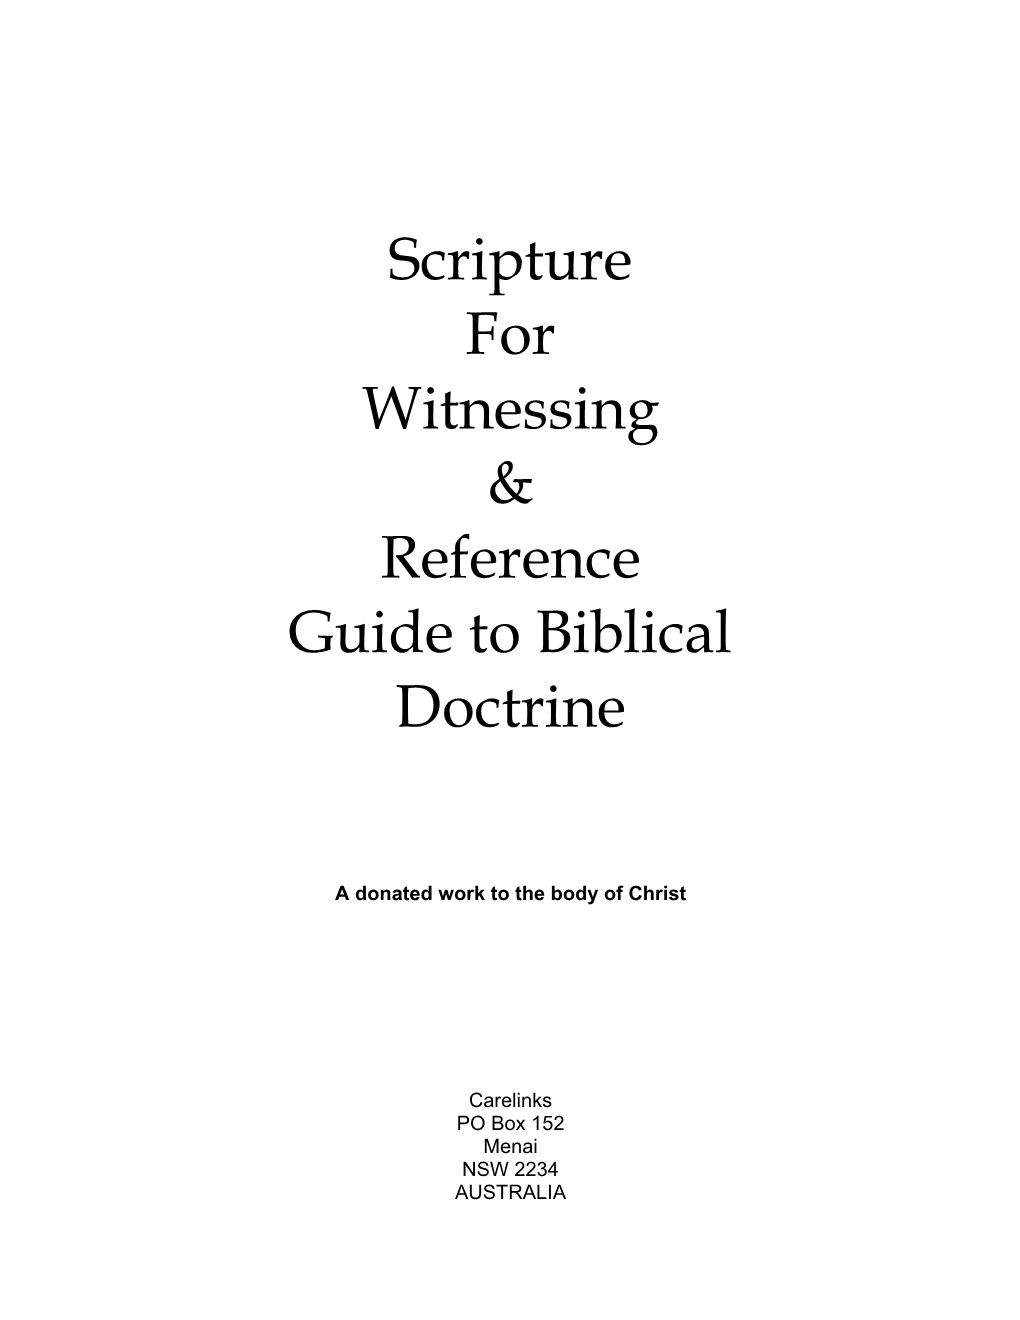 Scripture for Witnessing & Reference Guide to Biblical Doctrine